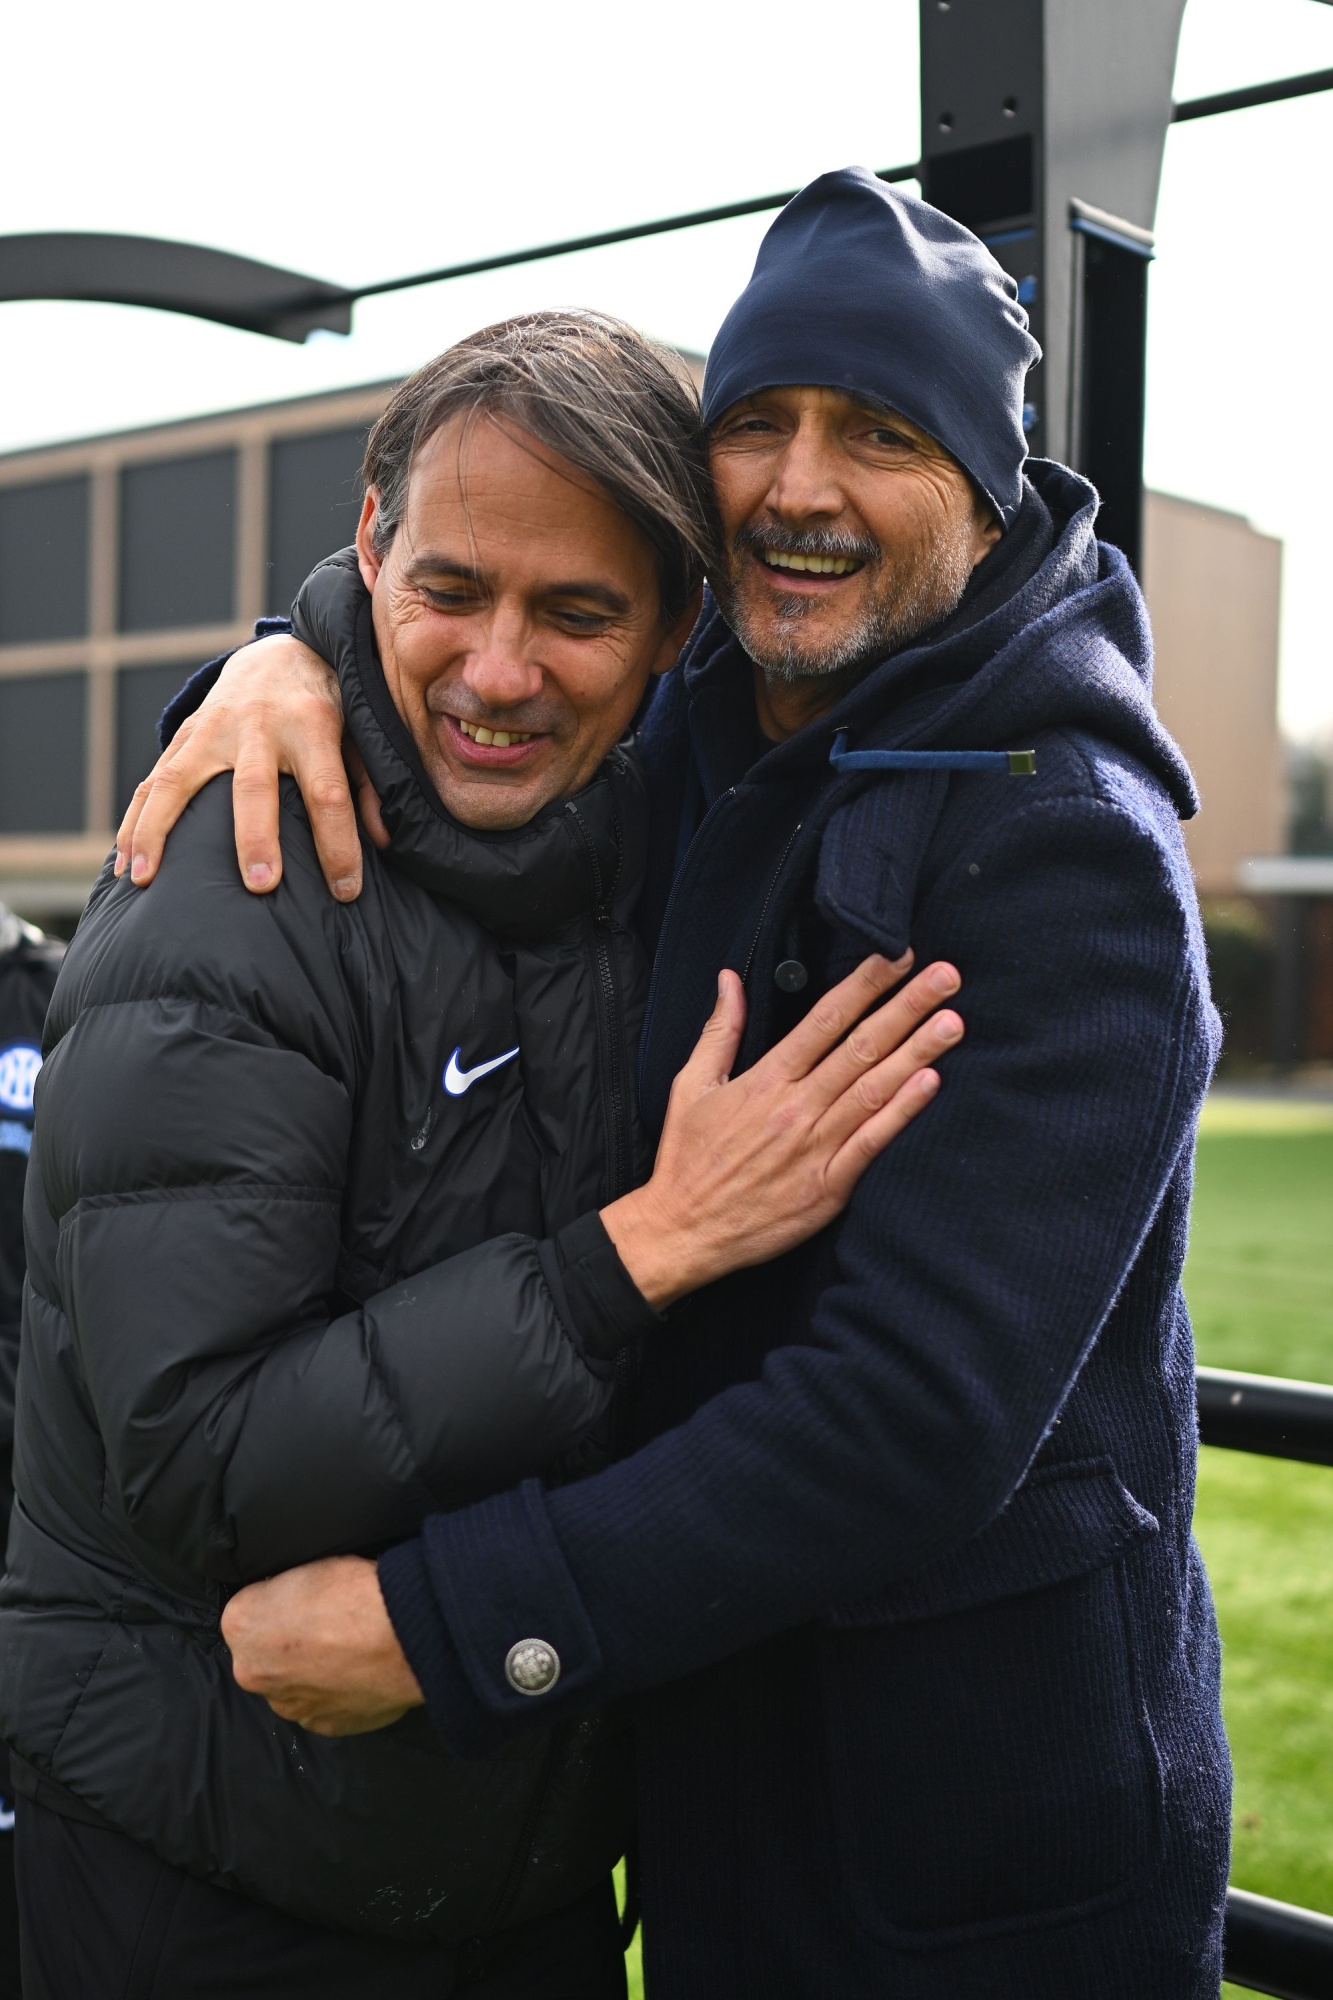 COMO, ITALY - FEBRUARY 07: Head Coach Simone Inzaghi of FC Internazionale meets Luciano Spalletti at the FC Internazionale training session at the club's training ground Suning Training Center  on February 07, 2024 in Como, Italy. (Photo by Mattia Ozbot - Inter/Inter via Getty Images)